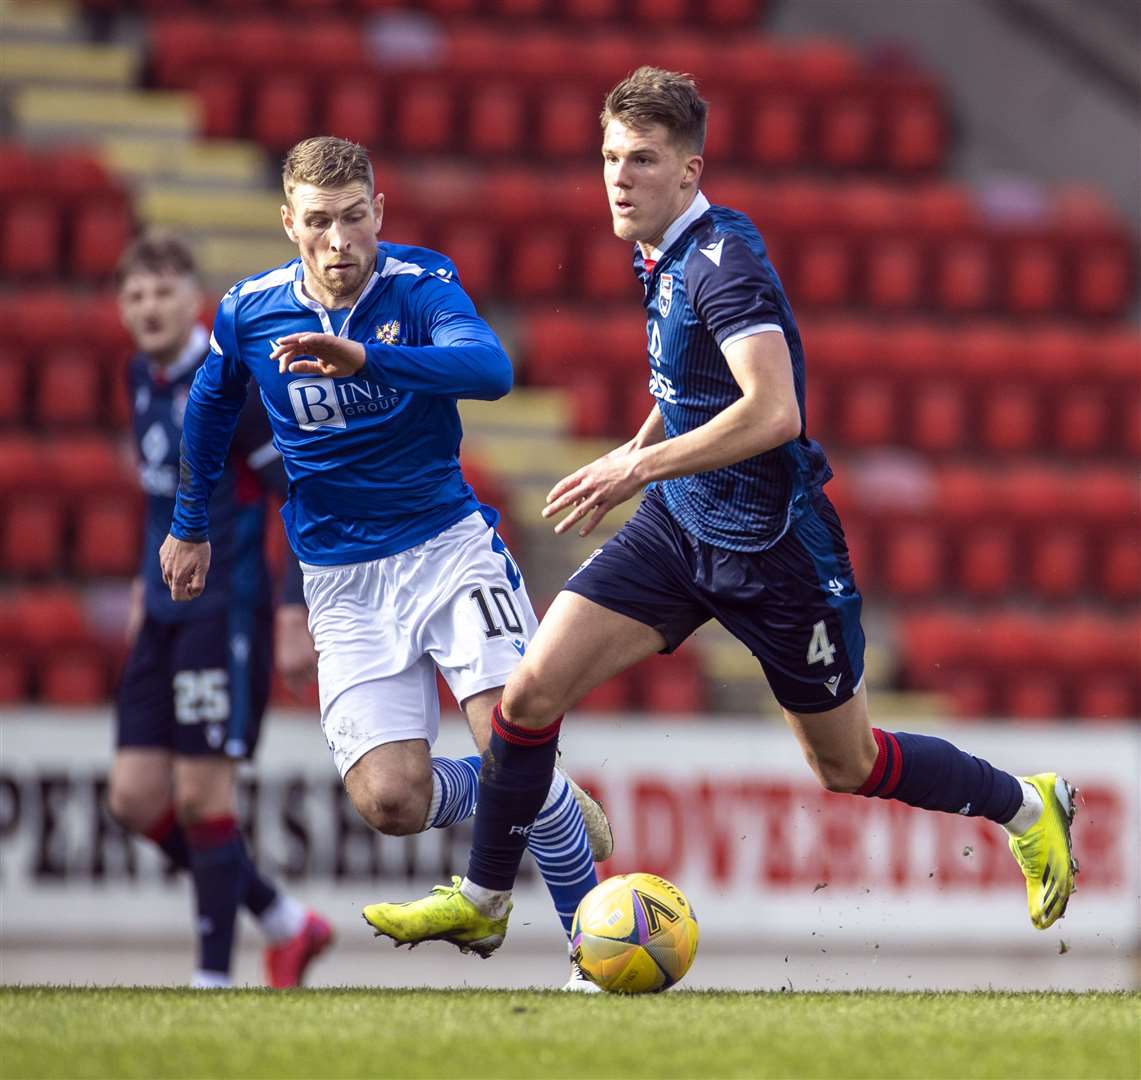 Ross County's Leo Hjelde gets past St.Johnstone's David Wotherspoon in 2021.